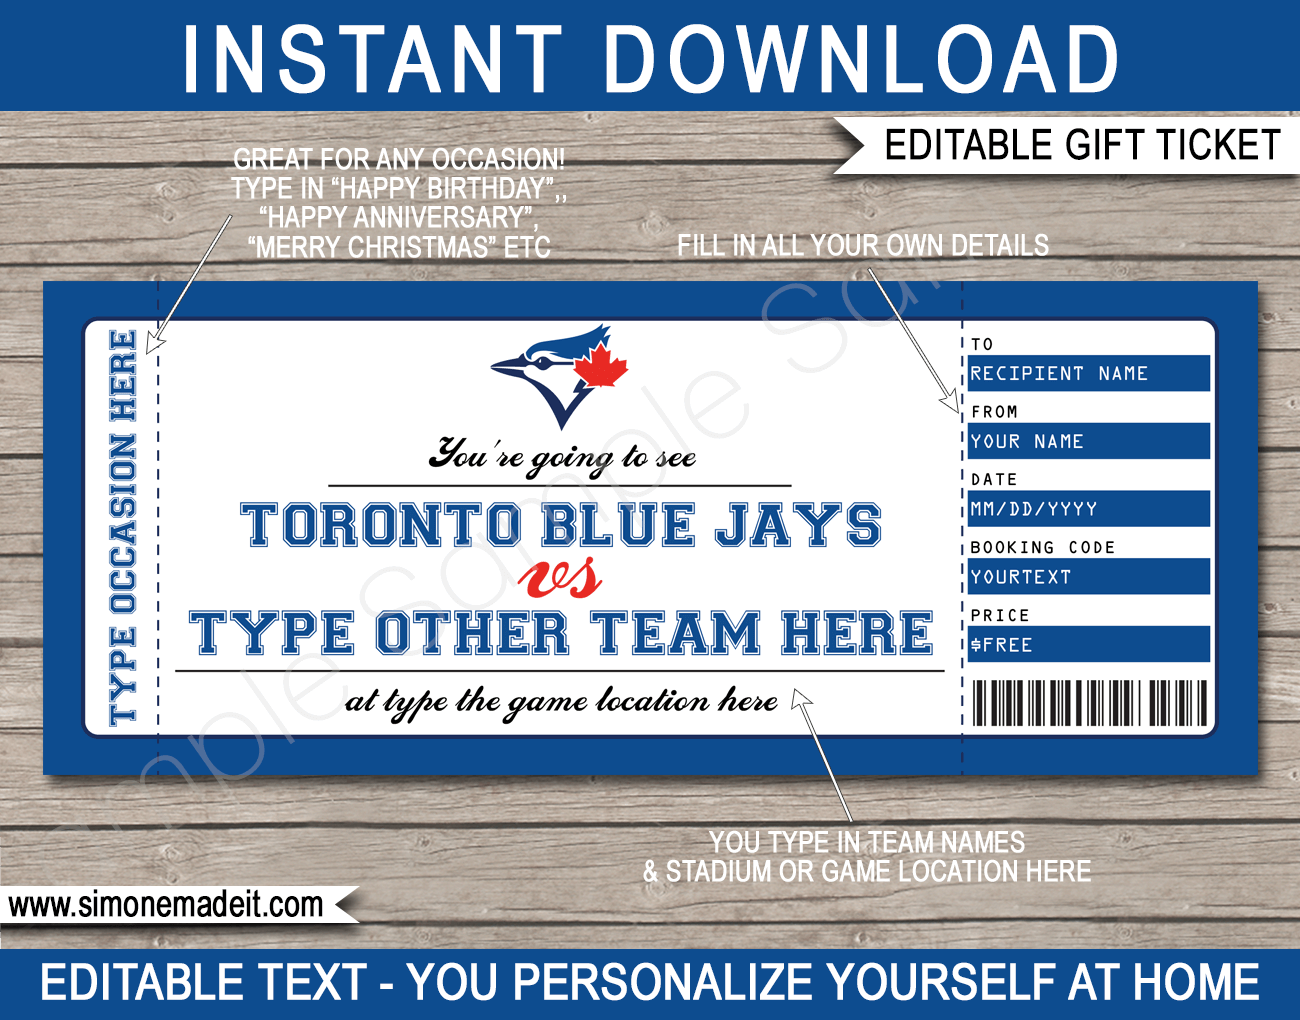 Charitybuzz: 4 TD Comfort Zone Seats to the Toronto Blue Jays Game on June  12 at Rogers Centre Plus $50 Toronto Blue Jays Gift Card for Each Guest